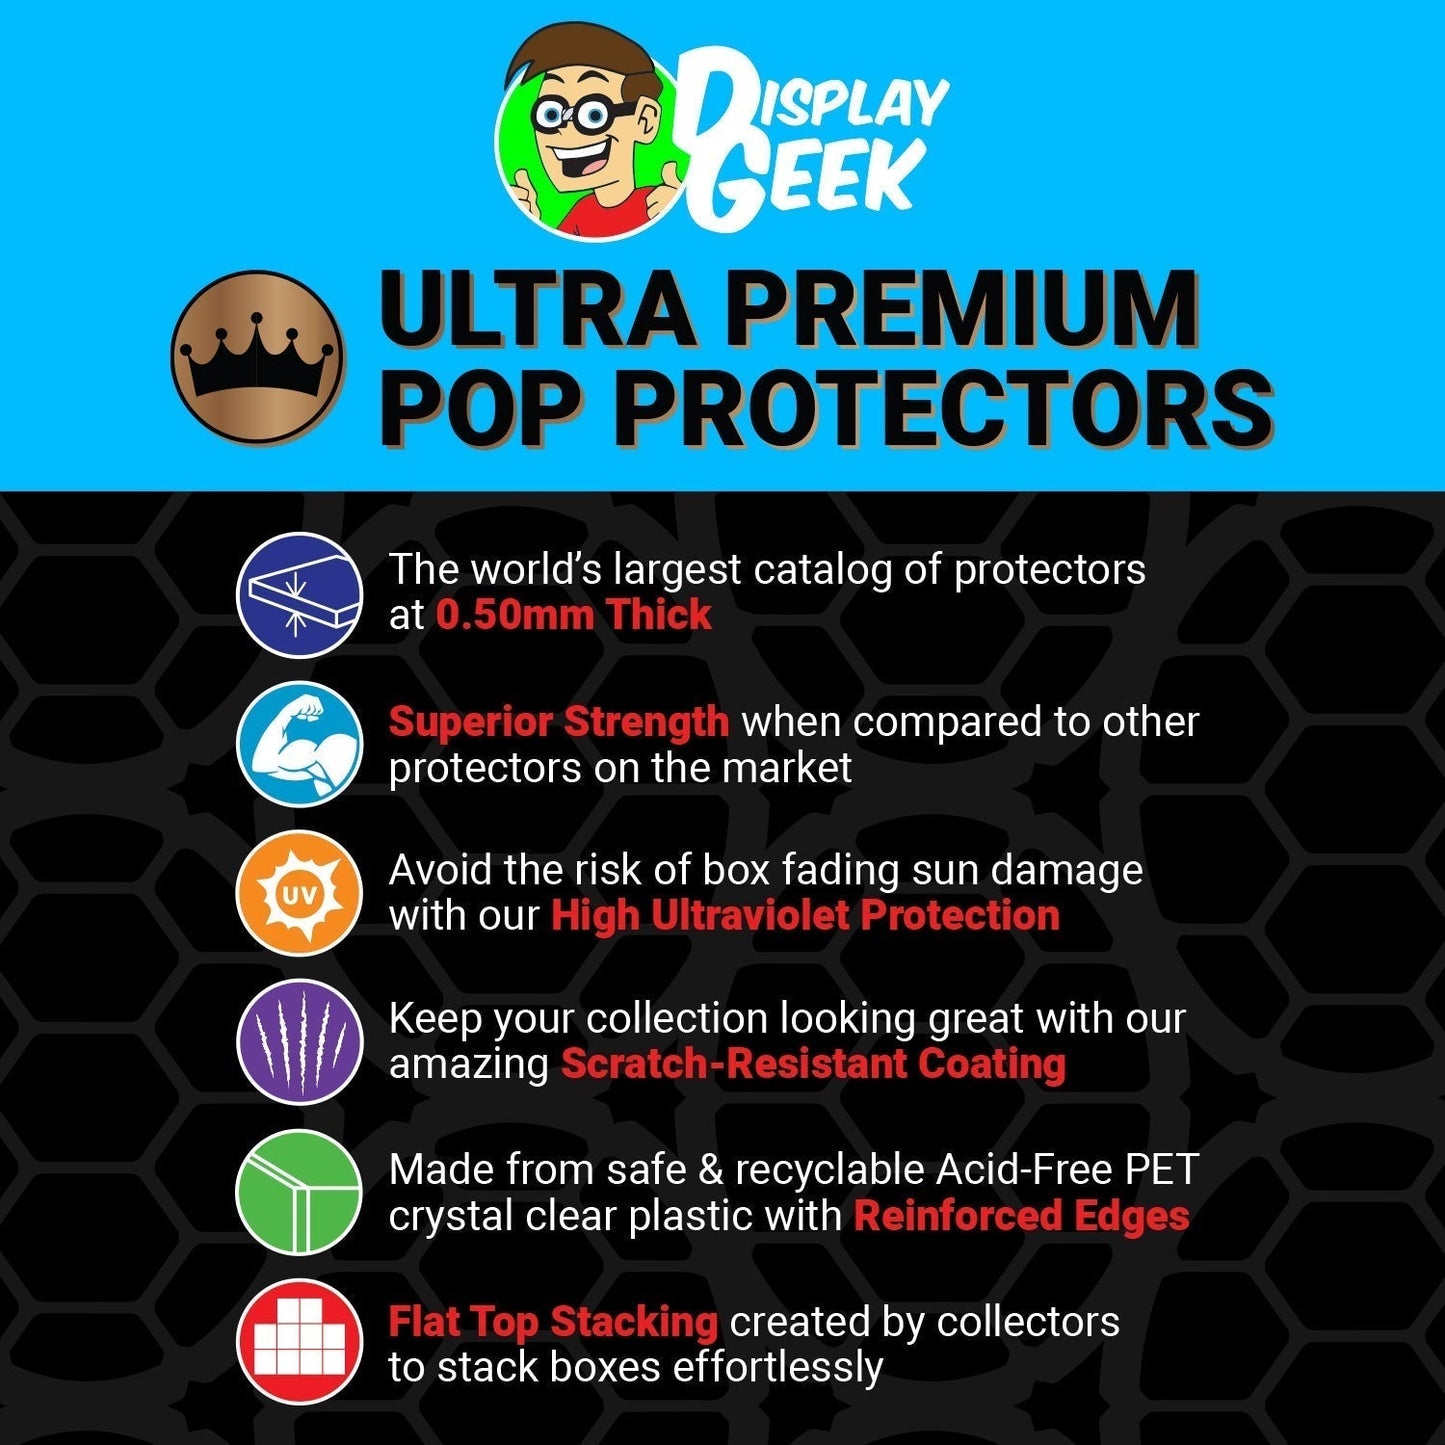 Pop Protector for 3 Pack Mrs. Who, Mrs. Which & Mrs. Whatsit Funko Pop - PPG Pop Protector Guide Search Created by Display Geek